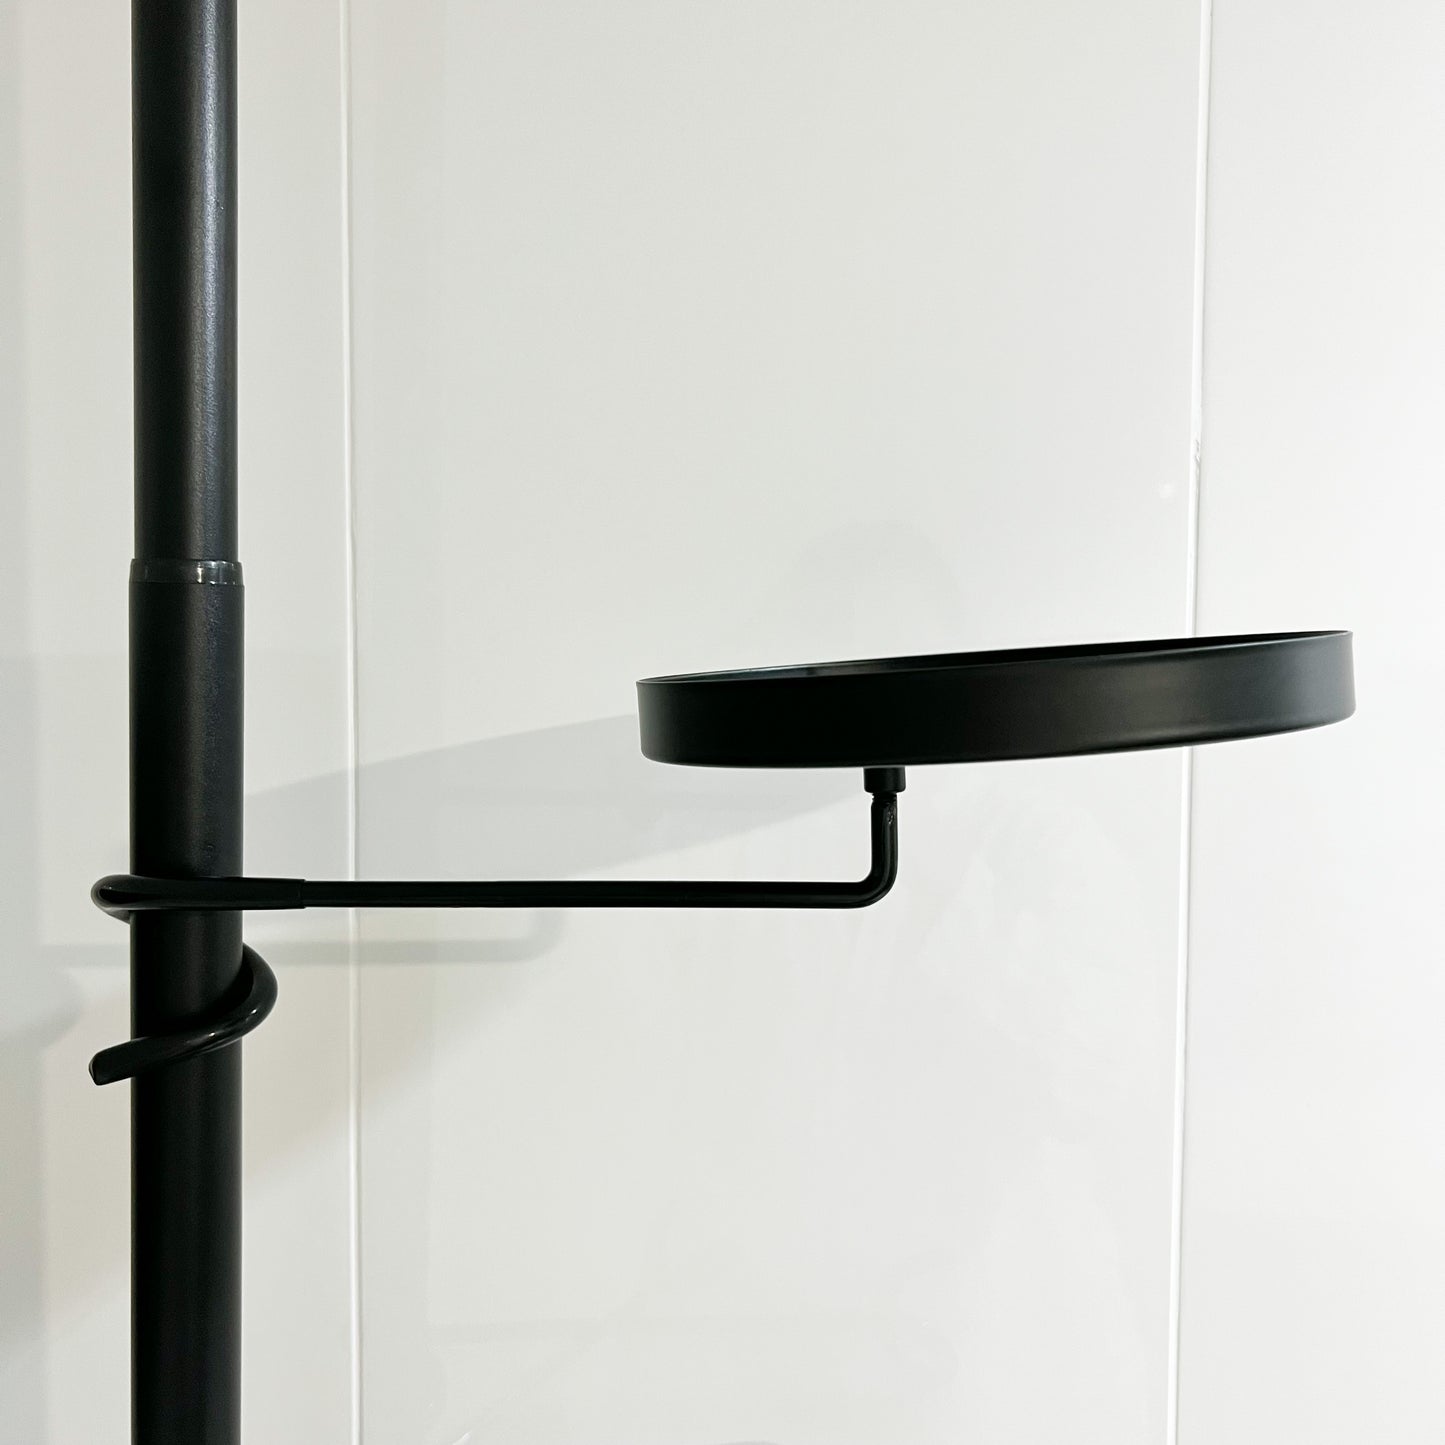 Black Plant Pole Tray - PREORDER for LATE FEB/EARLY MARCH DISPATCH